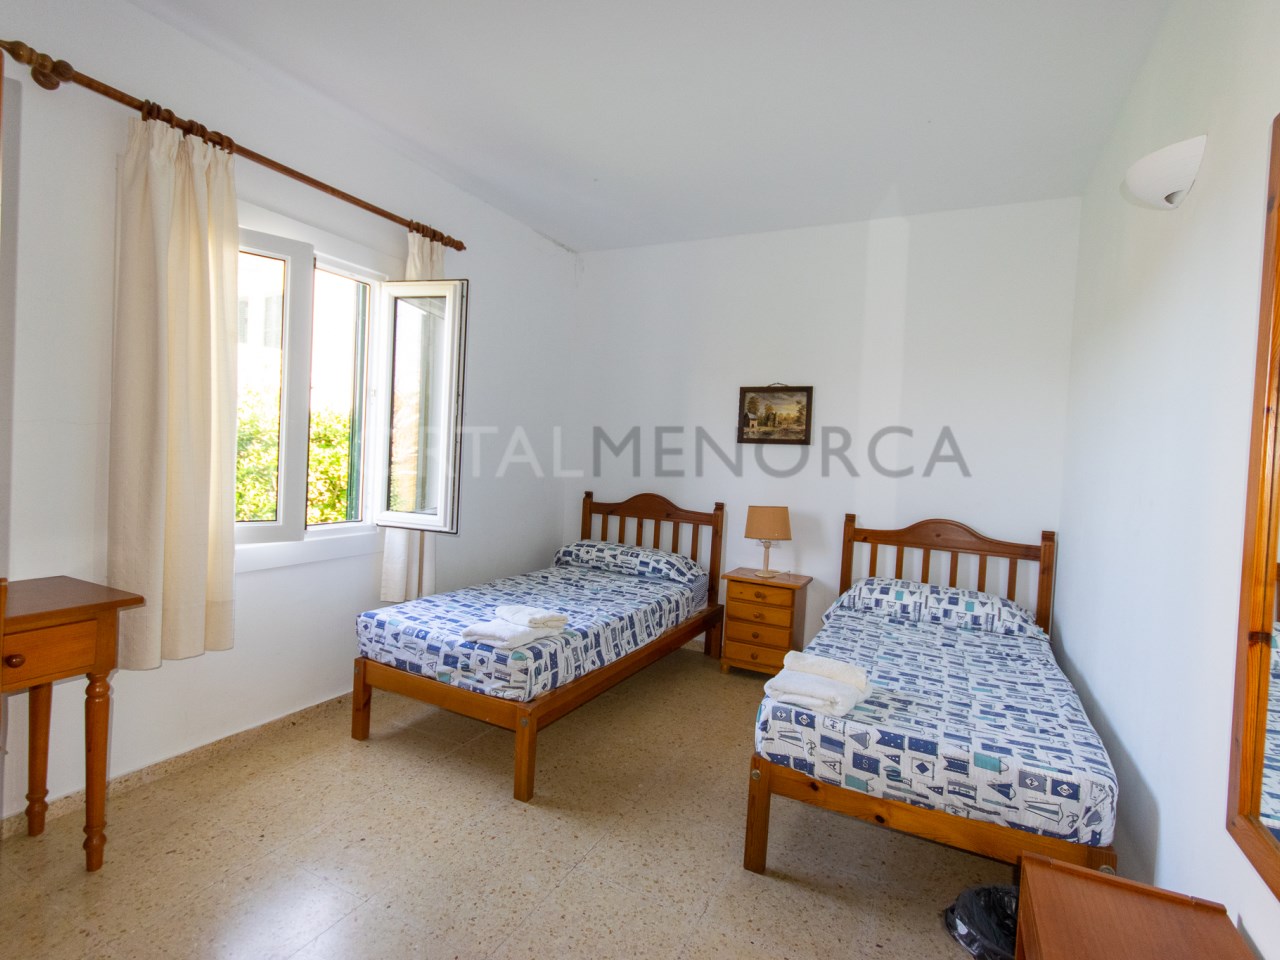 2 bed room in villa with pool, sea views and tourist license in Addaia